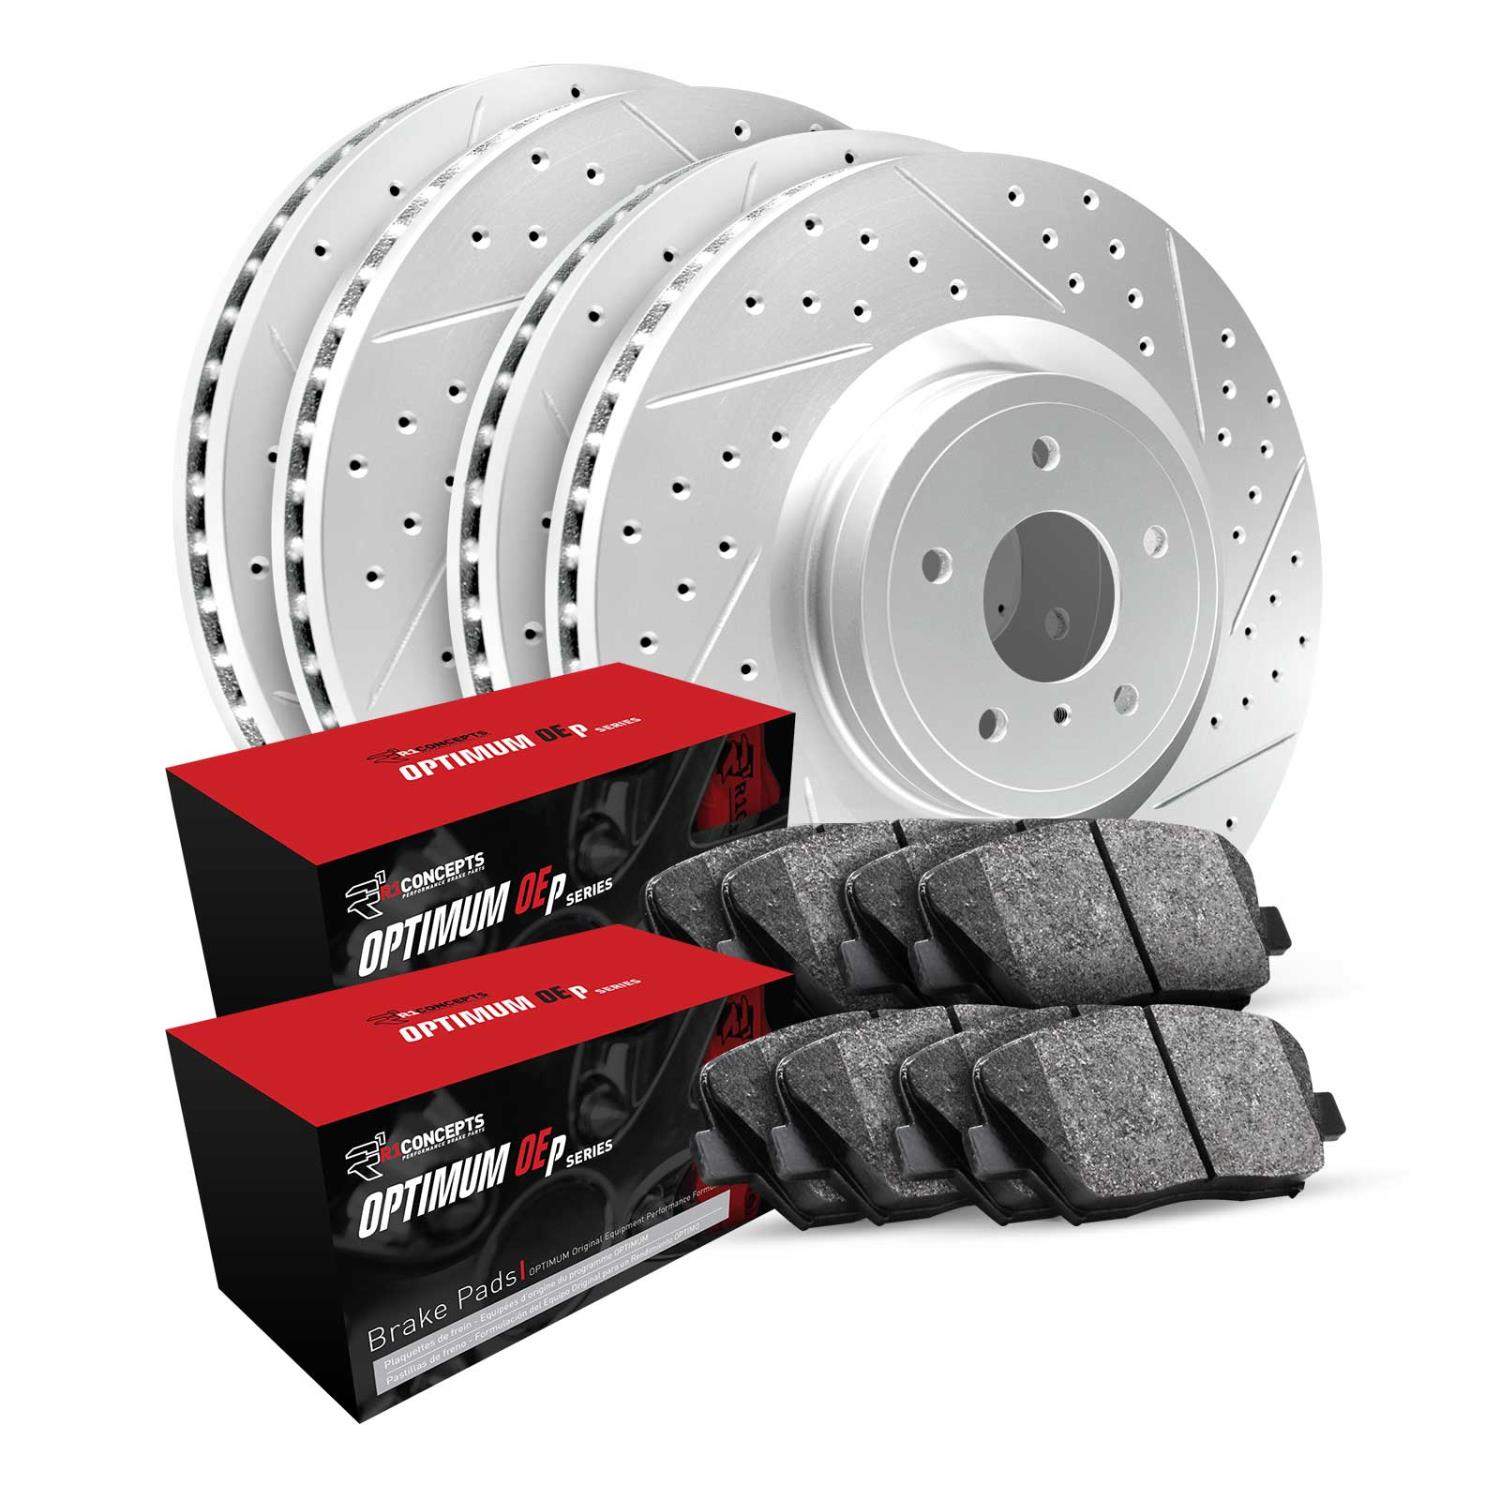 GEO-Carbon Drilled & Slotted Brake Rotor Set w/Optimum OE Pads, 1992-2002 Fits Multiple Makes/Models, Position: Front